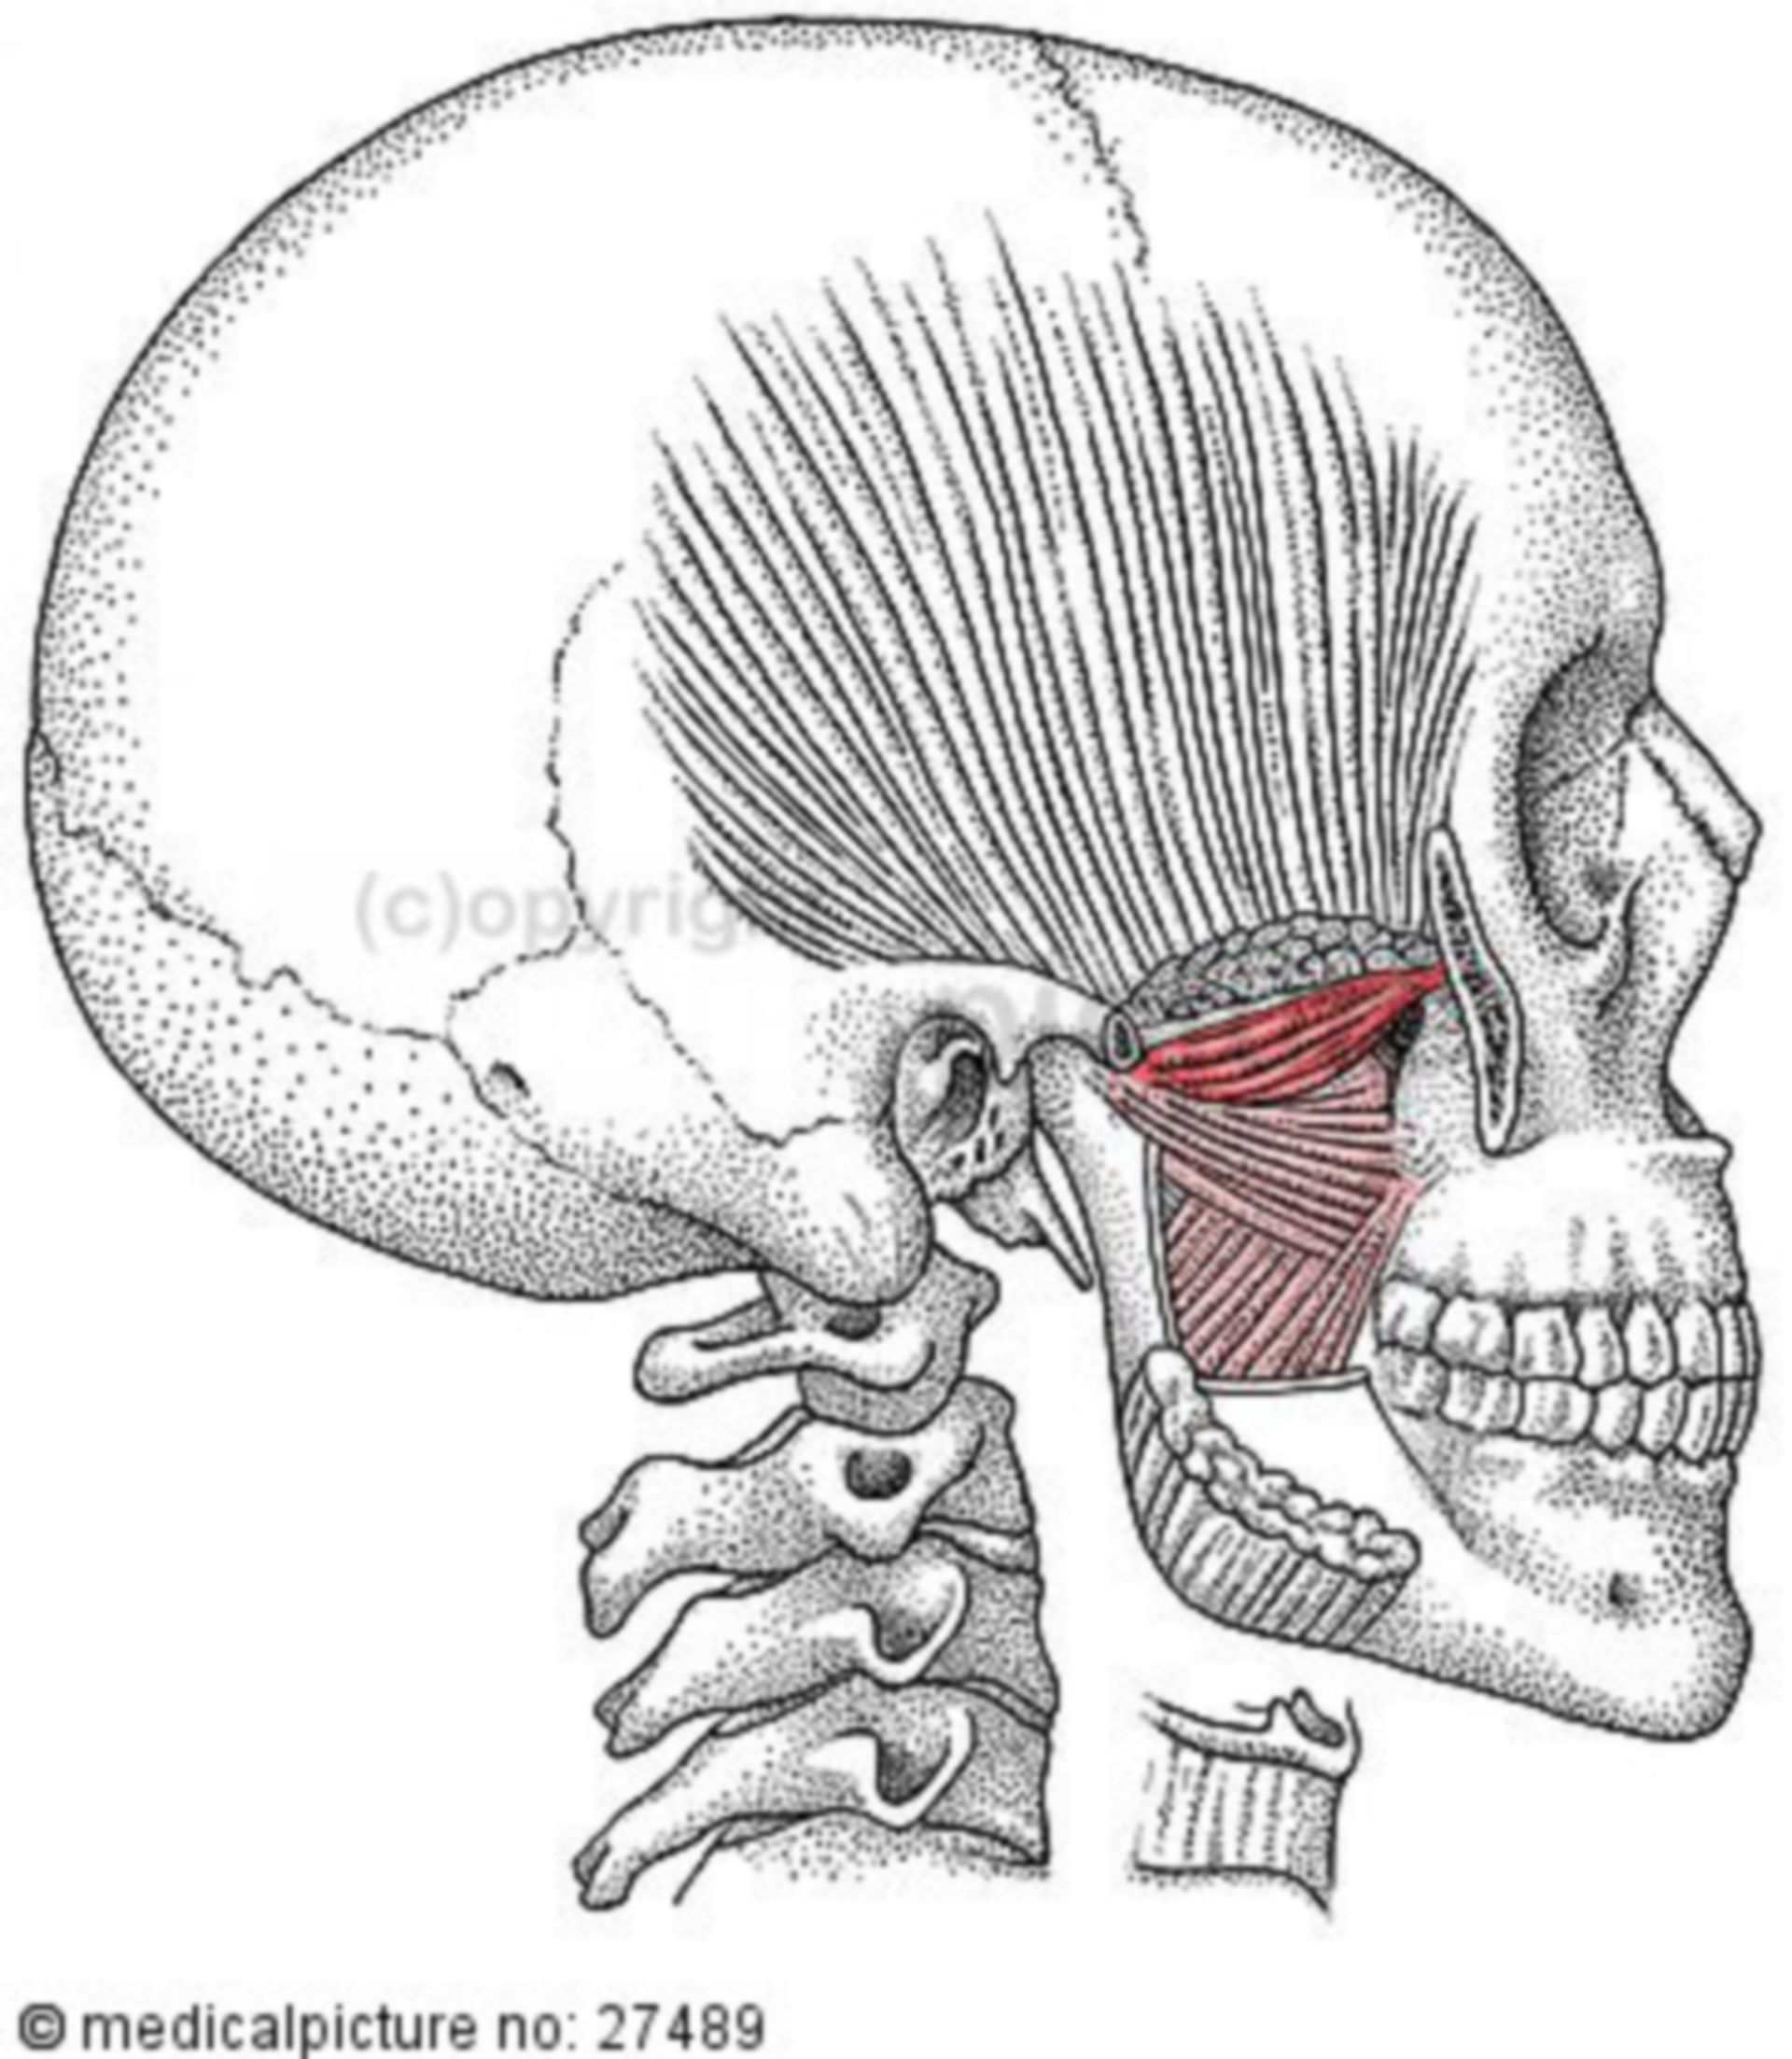 Lateral pterygoid muscle, mastication muscles